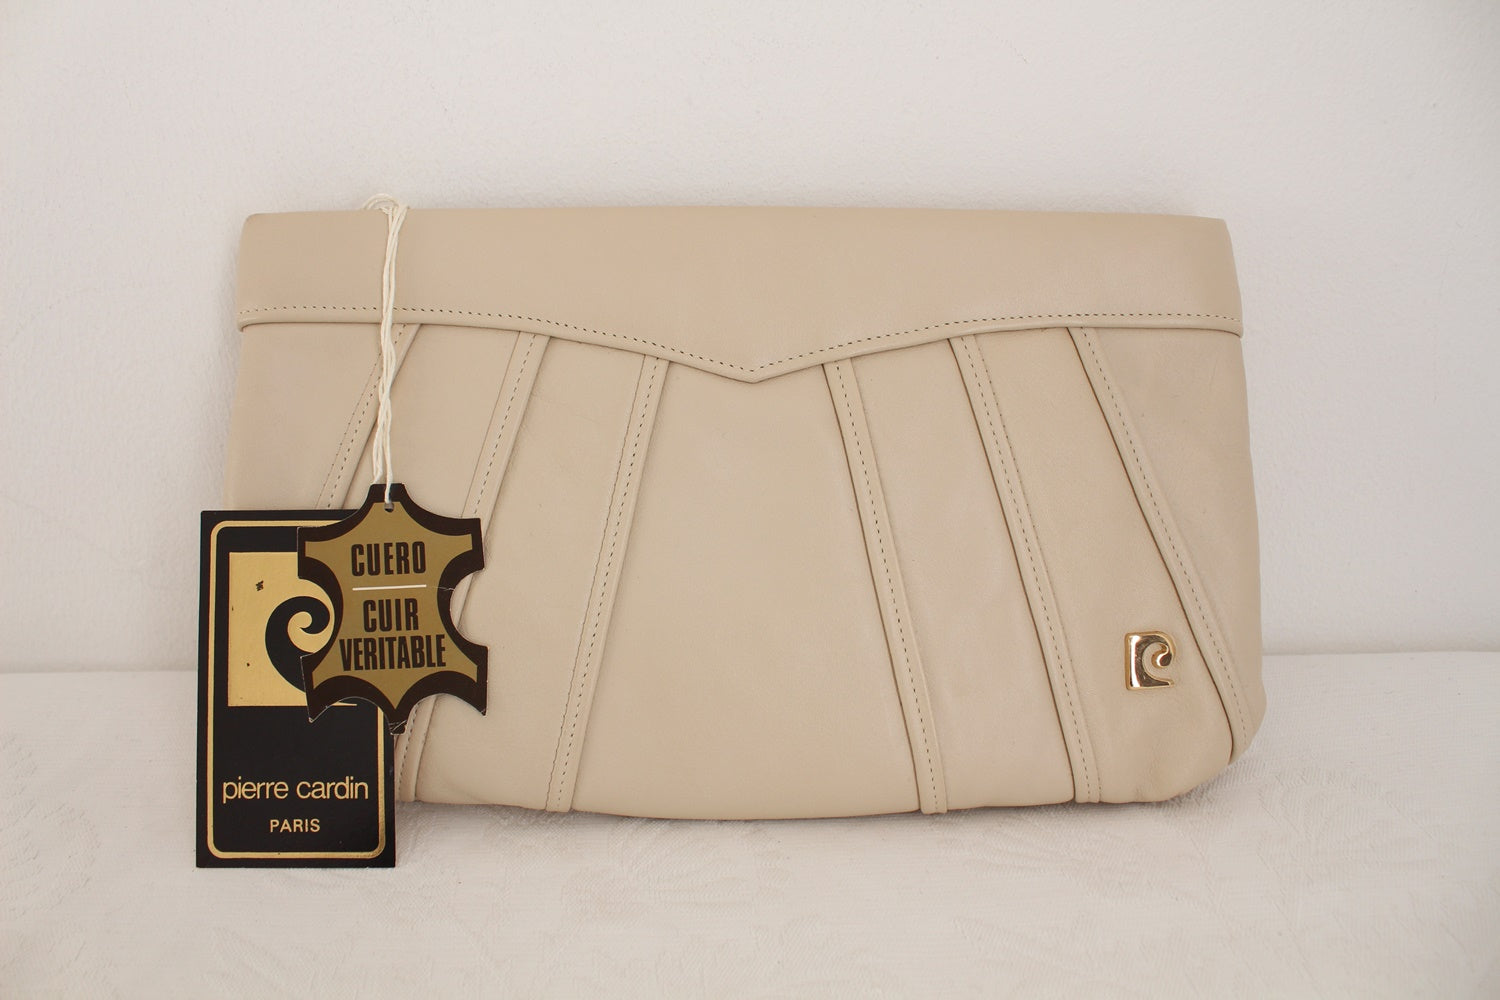 NEW WITH TAGS PIERRE CARDIN VINTAGE LEATHER CLUTCH